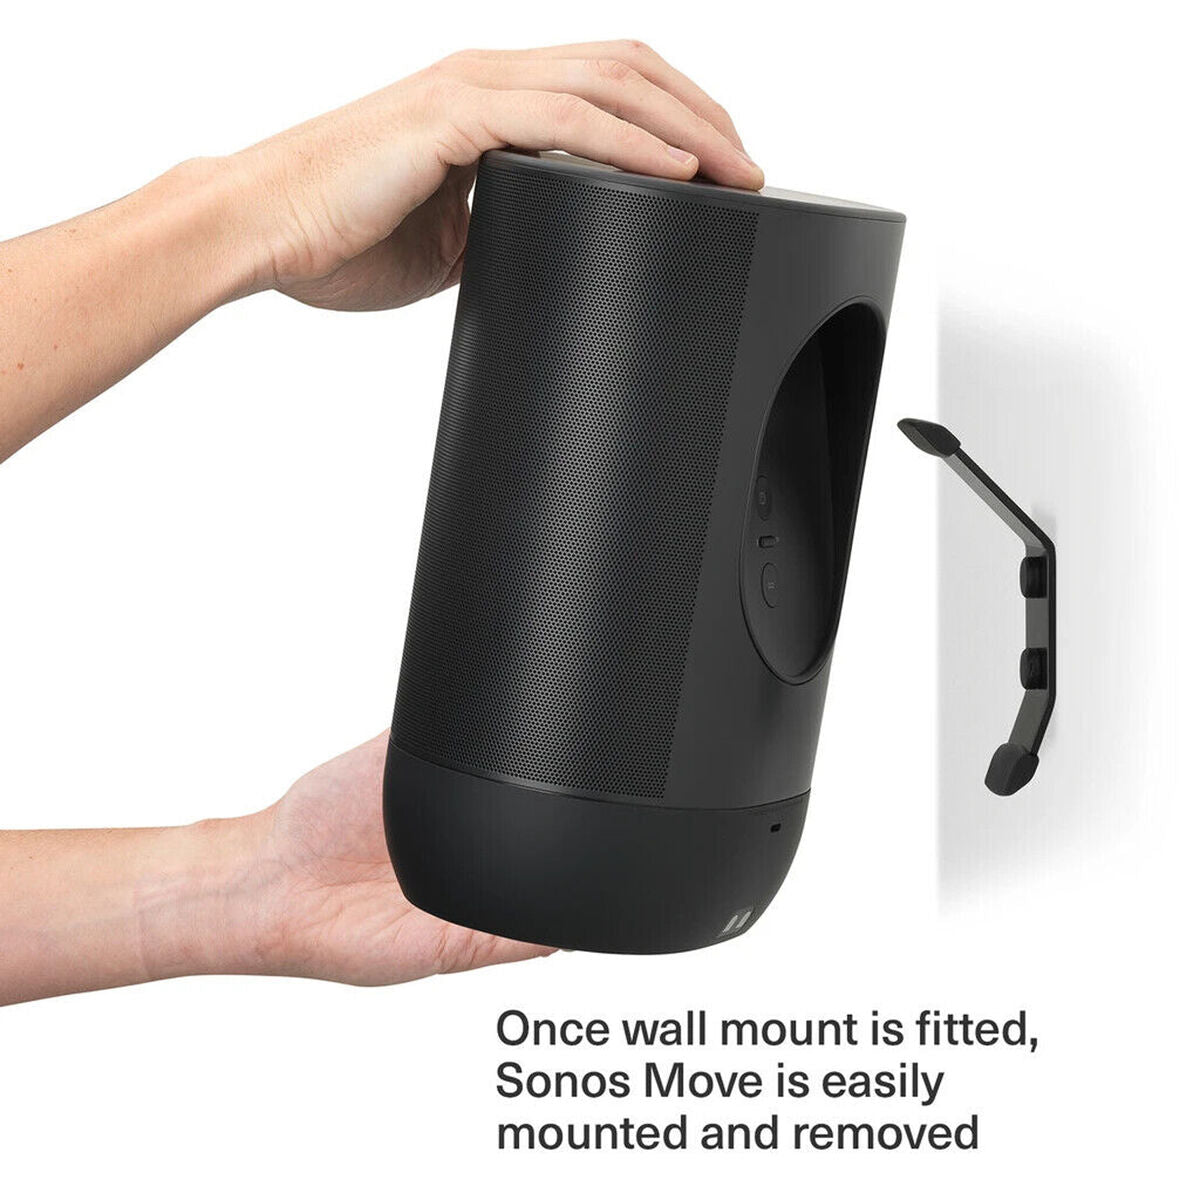 Speaker Stand Sonos Move Black (1 Unit), Sonos, Electronics, Audio and Hi-Fi equipment, speaker-stand-sonos-move-black-1-unit, Brand_Sonos, category-reference-2609, category-reference-2637, category-reference-2882, category-reference-t-19653, category-reference-t-19899, category-reference-t-21329, category-reference-t-25554, category-reference-t-7441, cinema and television, Condition_NEW, music, Price_20 - 50, RiotNook